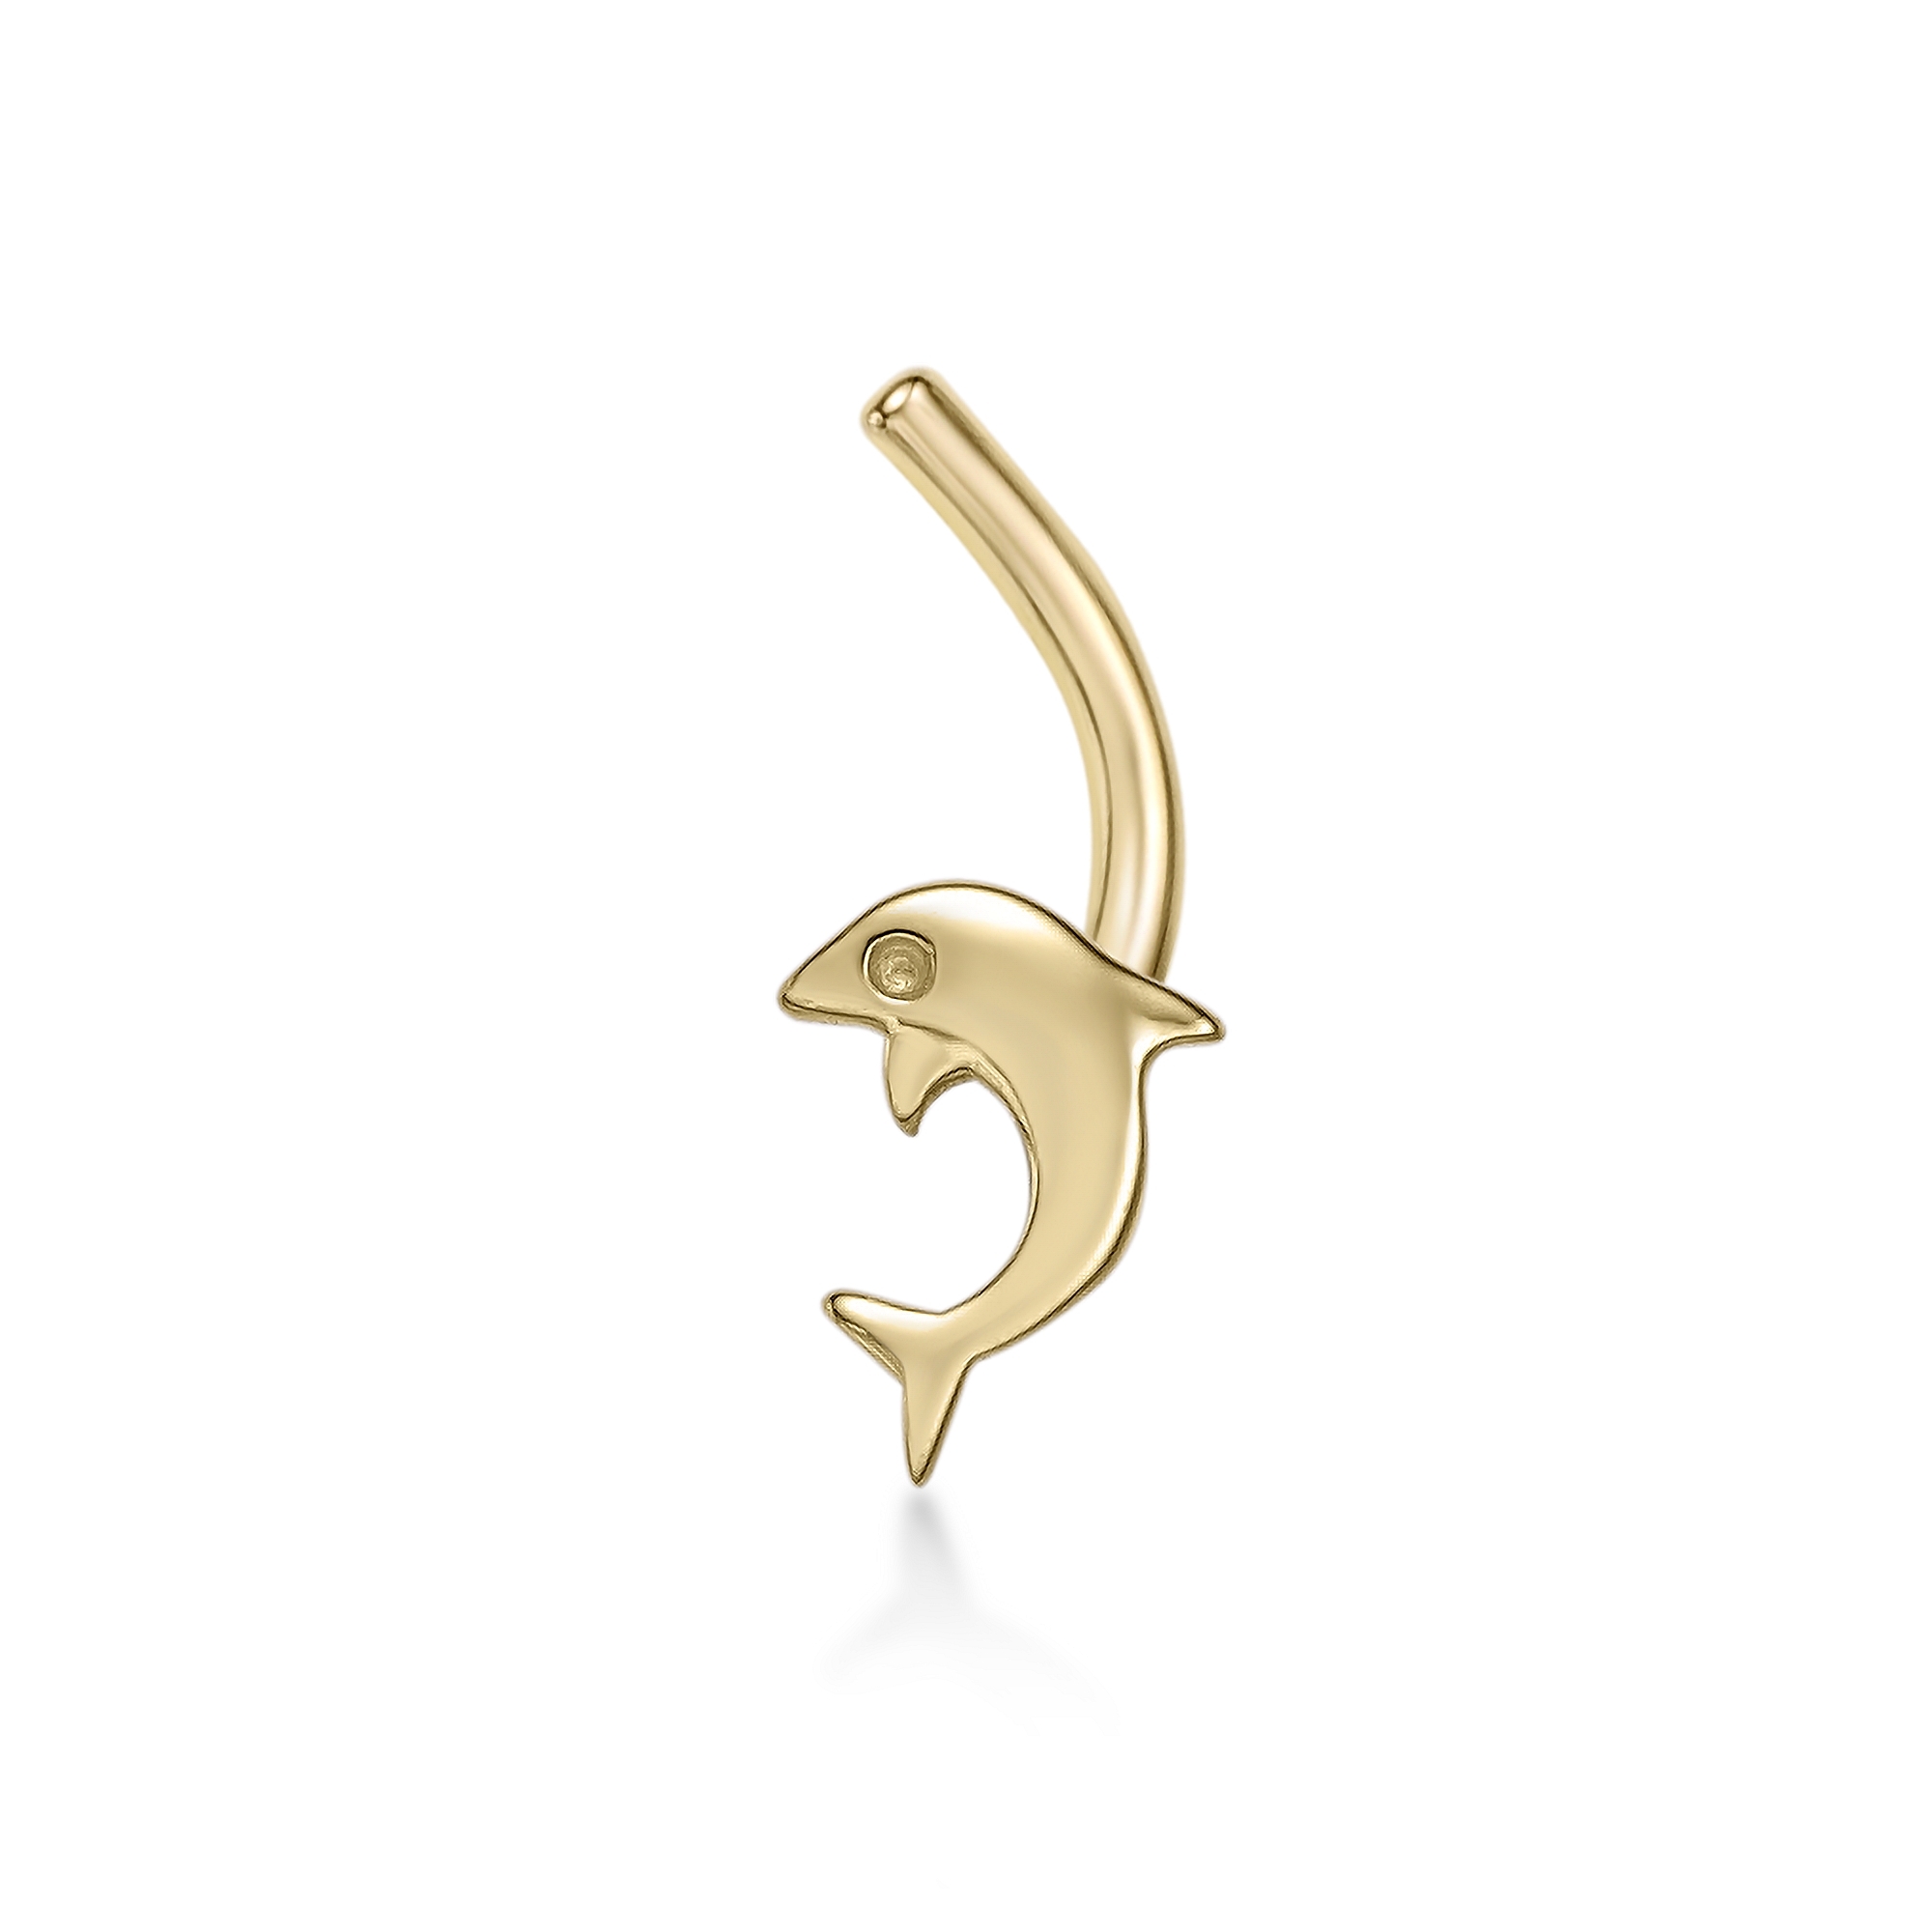 52374-nose-ring-default-collection-yellow-gold-52374.jpg